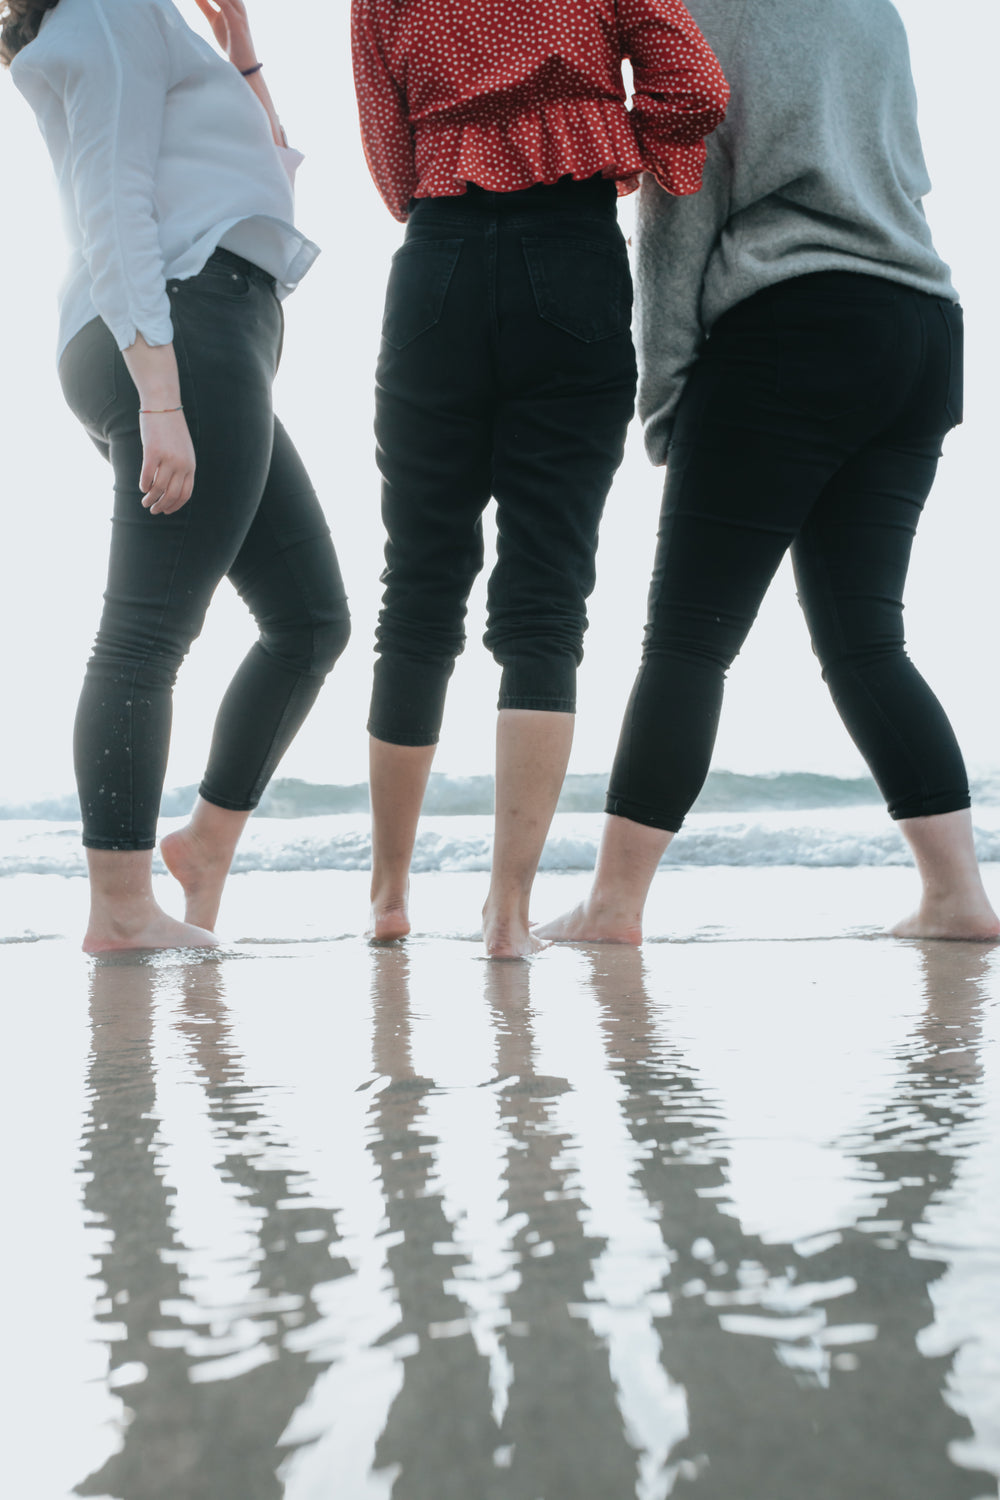 three peoples legs standing on a wet beach